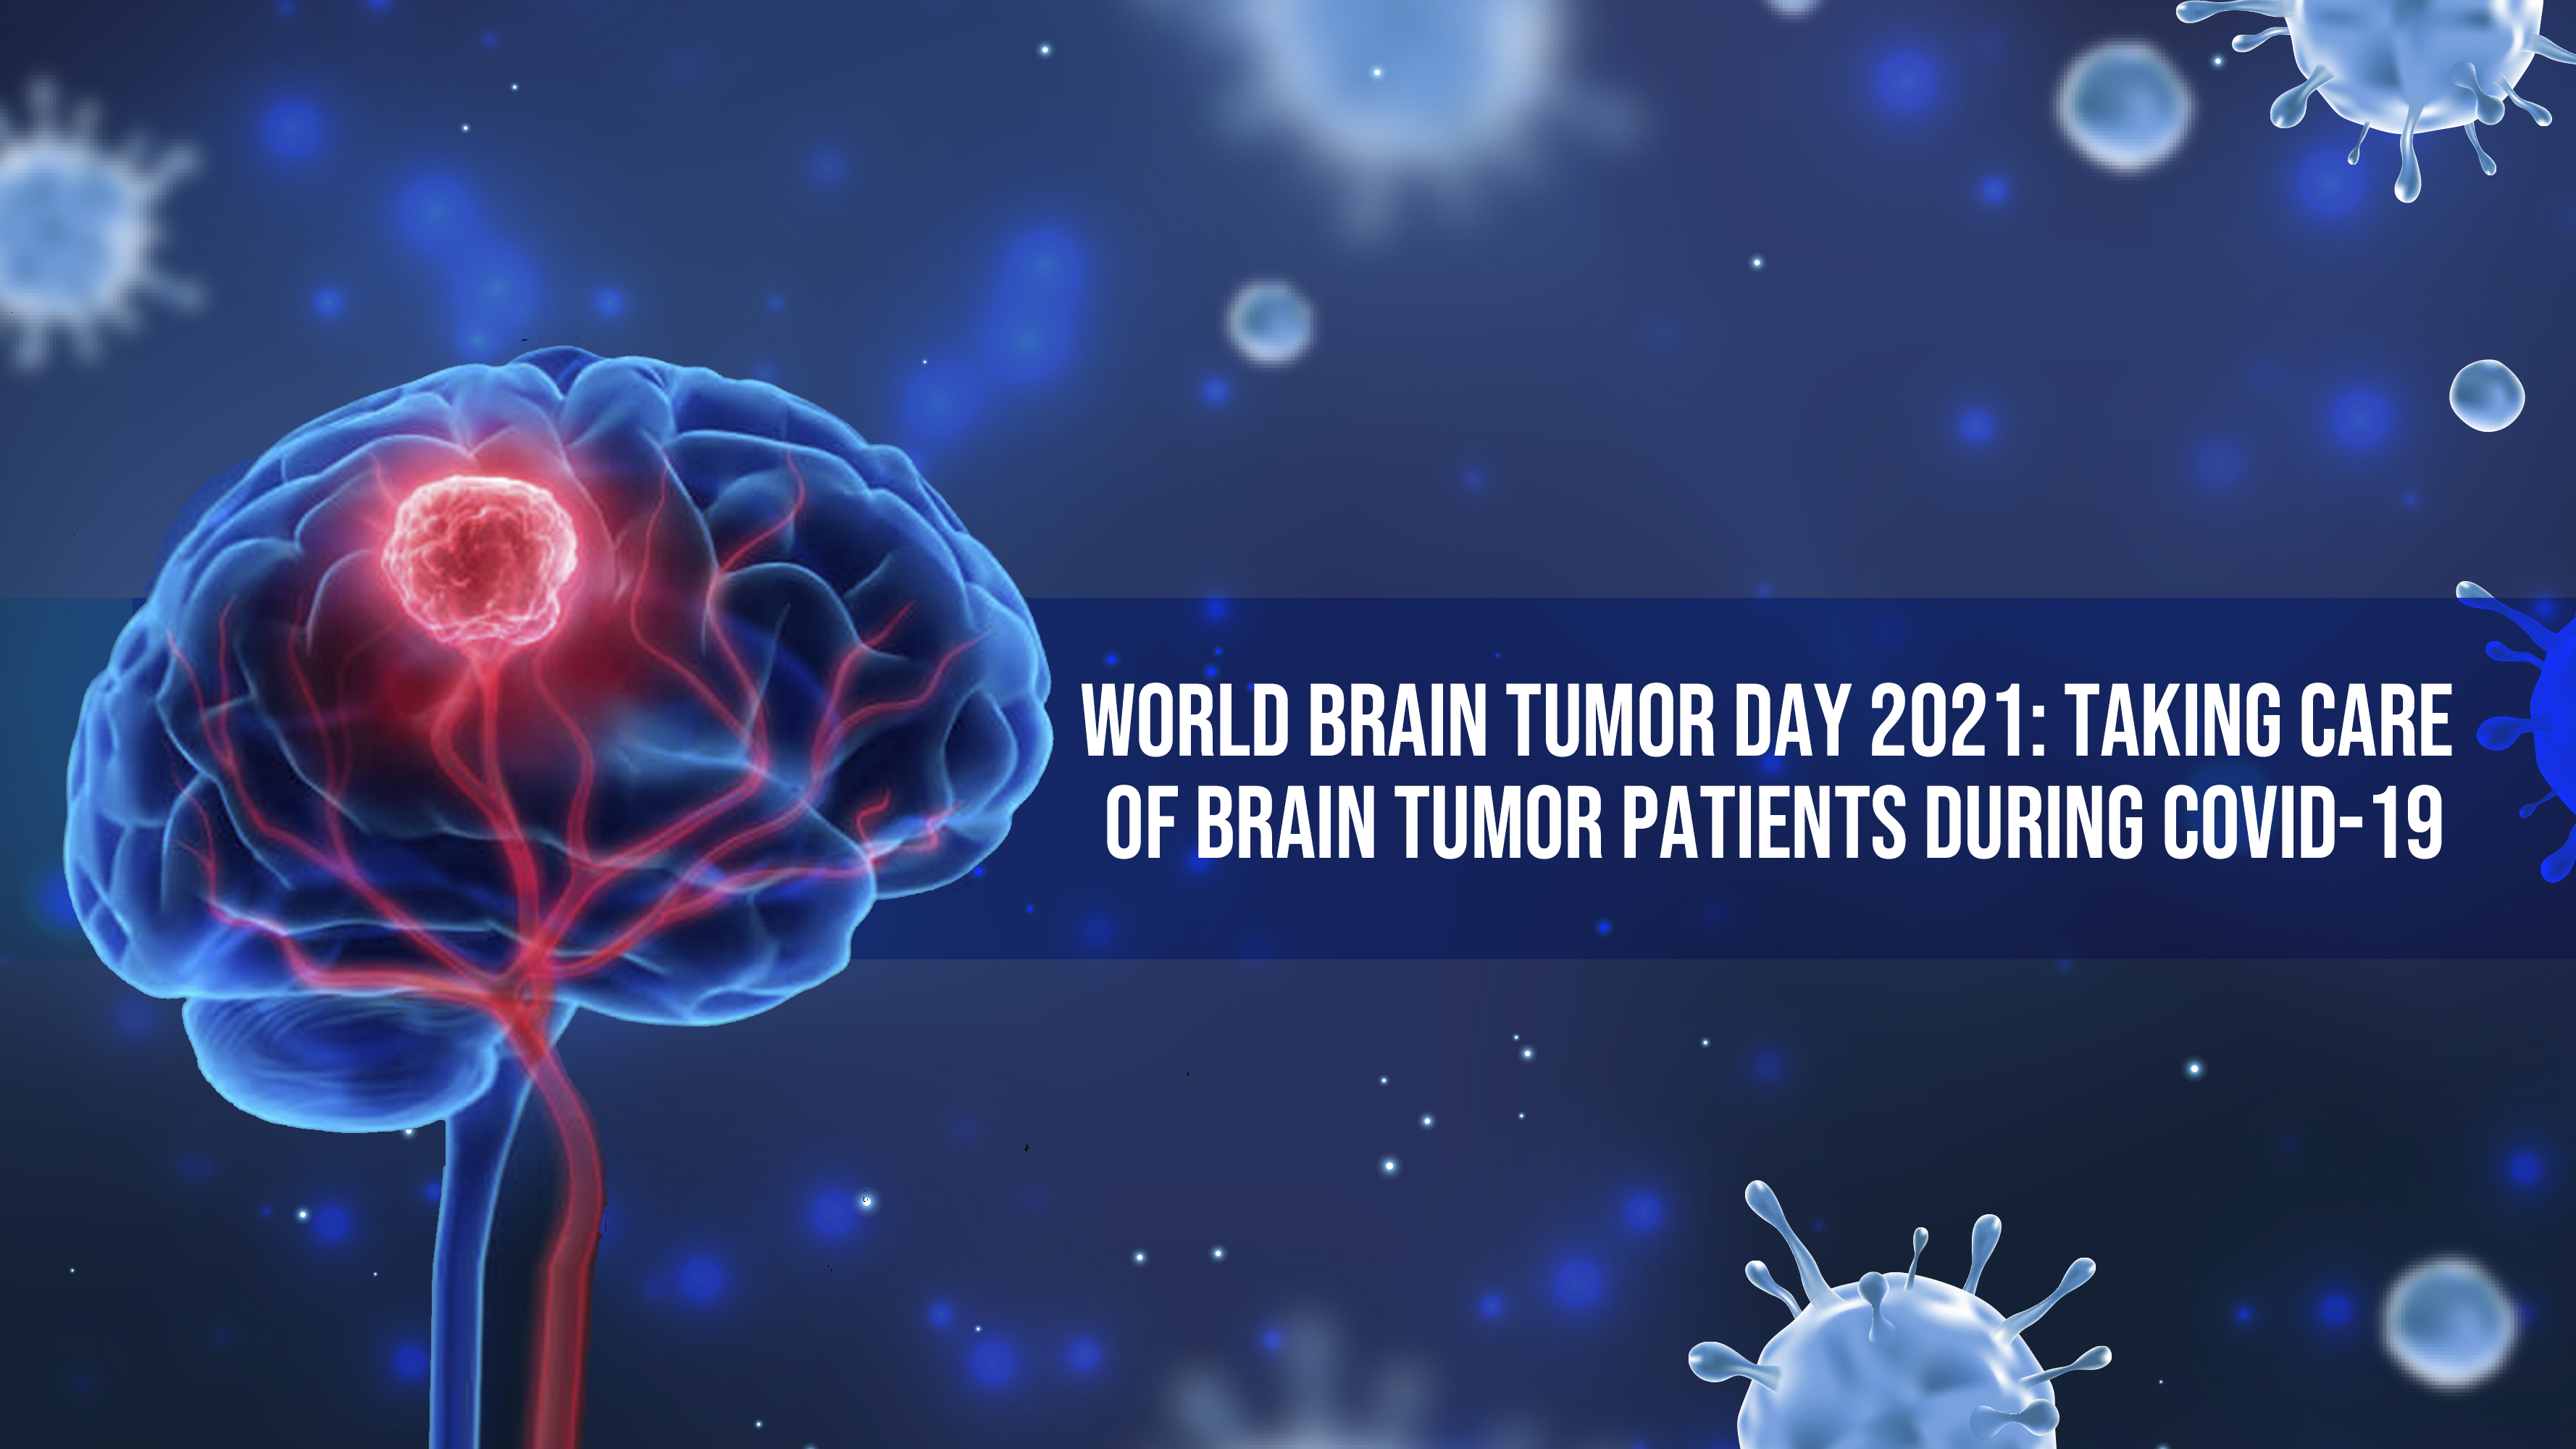 Impact of COVID-19 on Brain Tumour Patients and Treatment